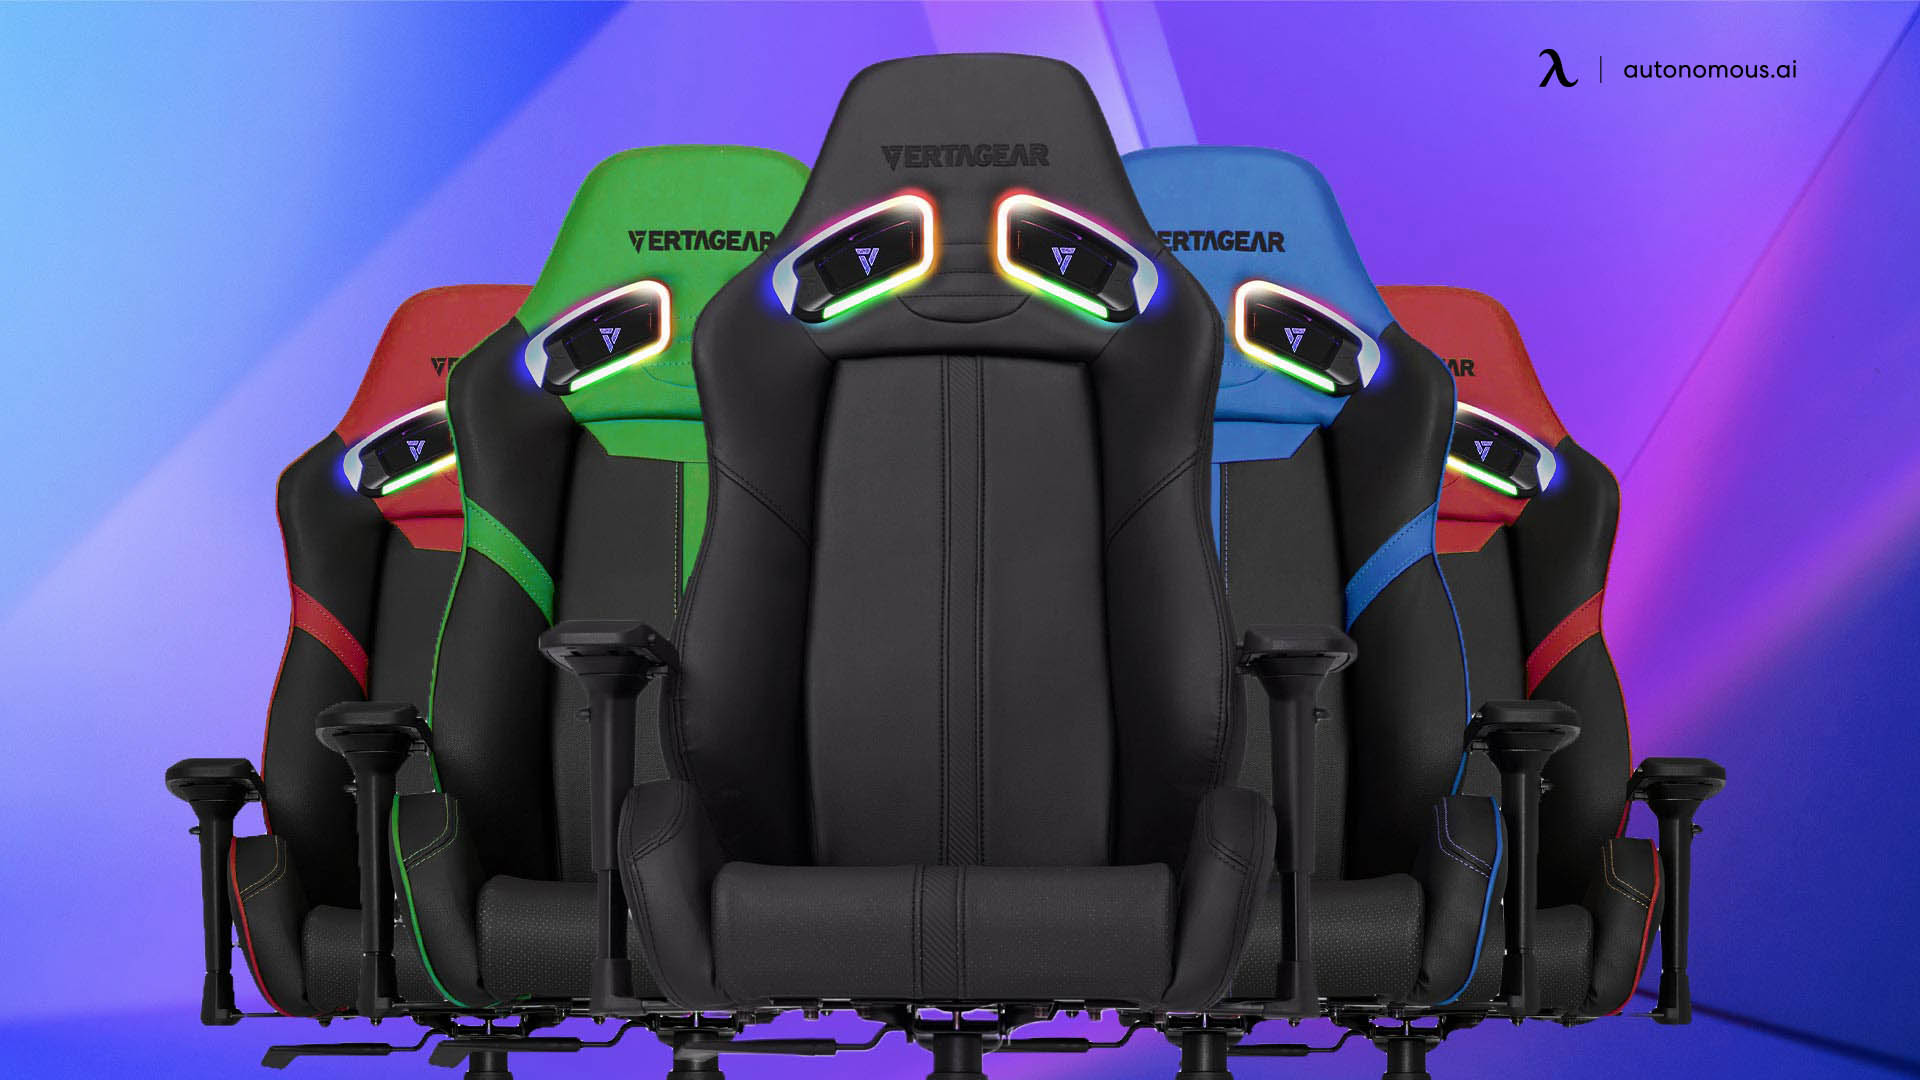 Vertagear SL5000 gaming chair with neck support